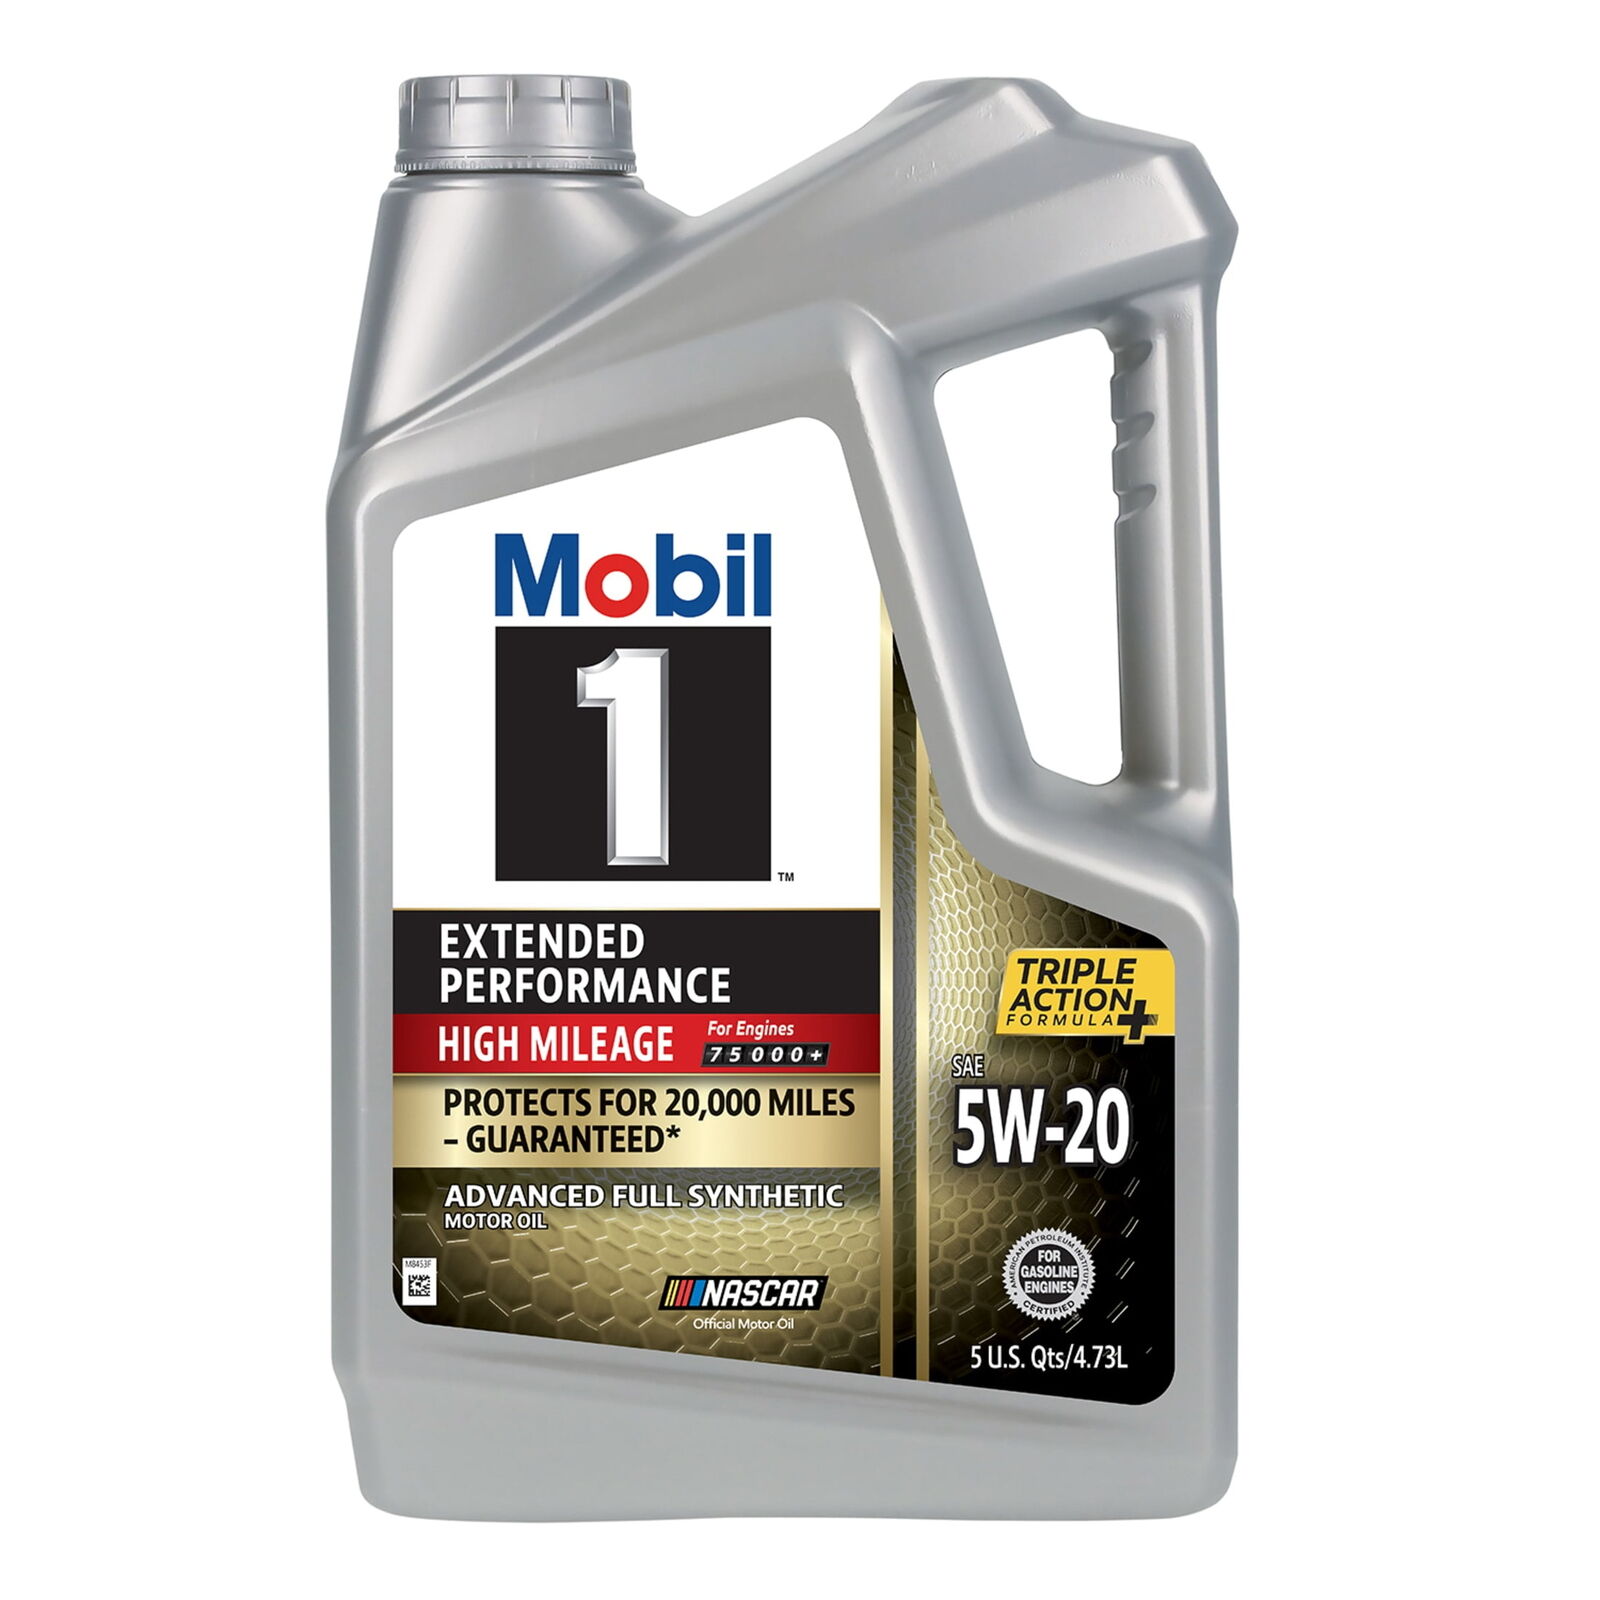  Extended Performance High Mileage Full Synthetic Motor Oil 5W-20, 5 Quart